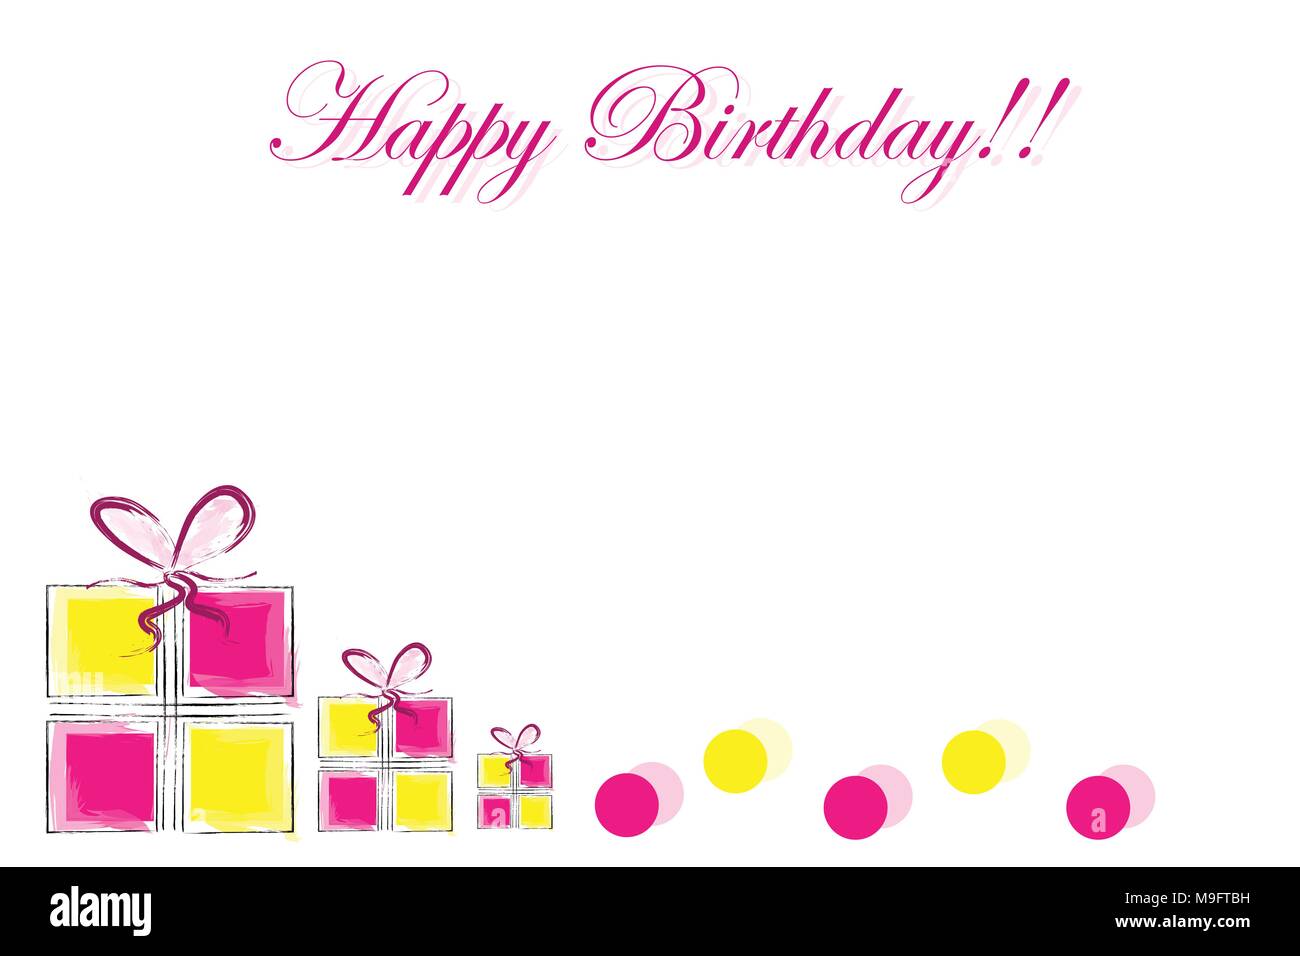 happy birthday card with gift boxes and polka dots vector - blank